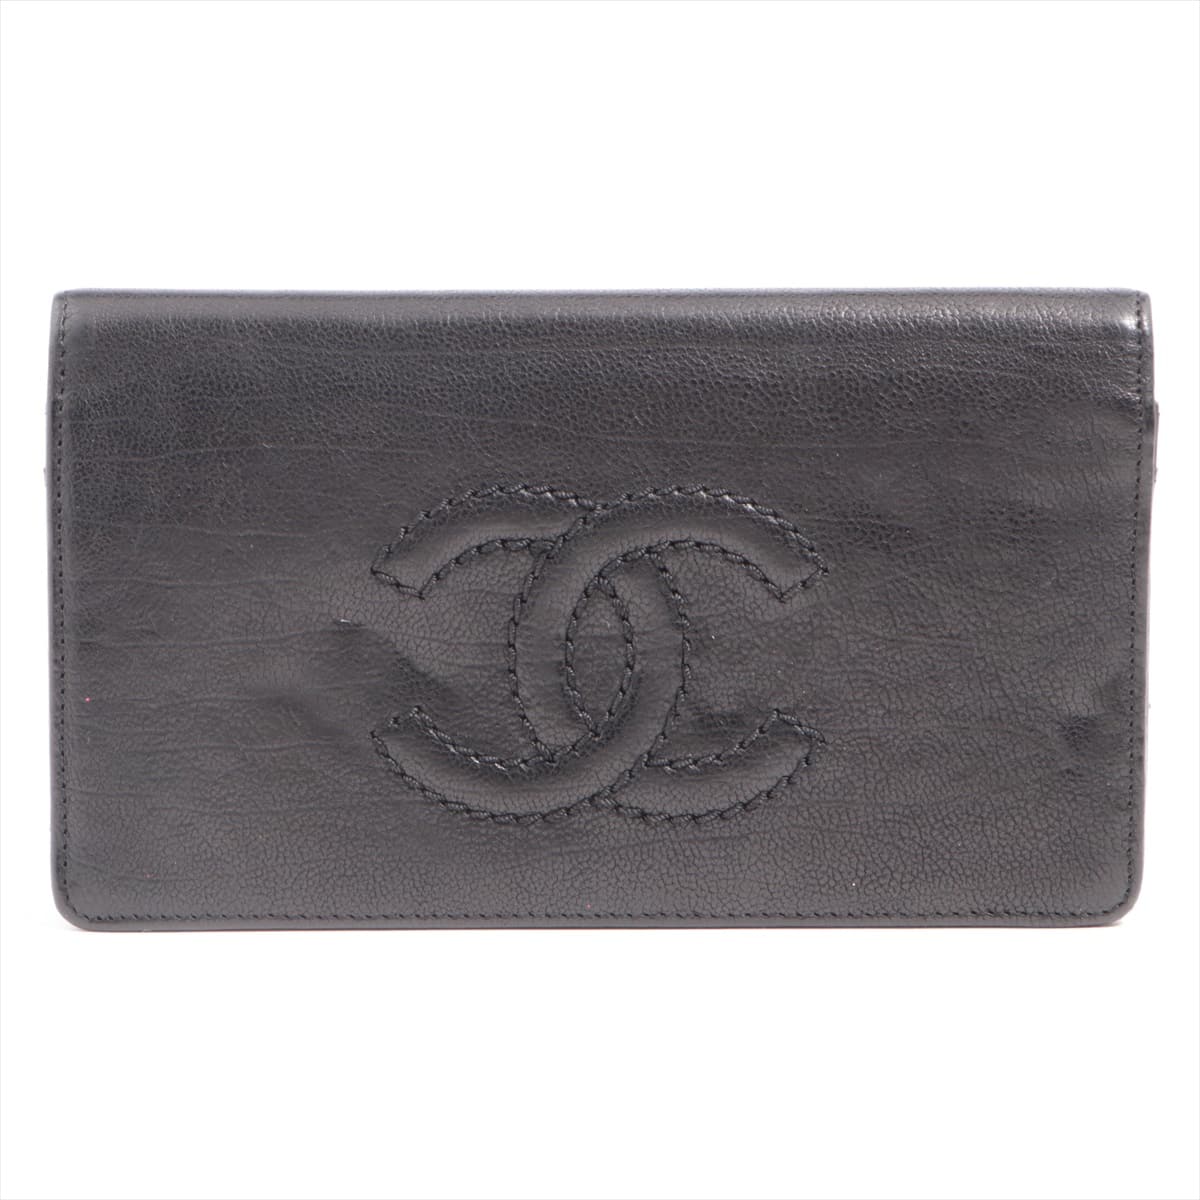 Chanel Coco Mark Leather Wallet Black Silver Metal fittings 10XXXXXX